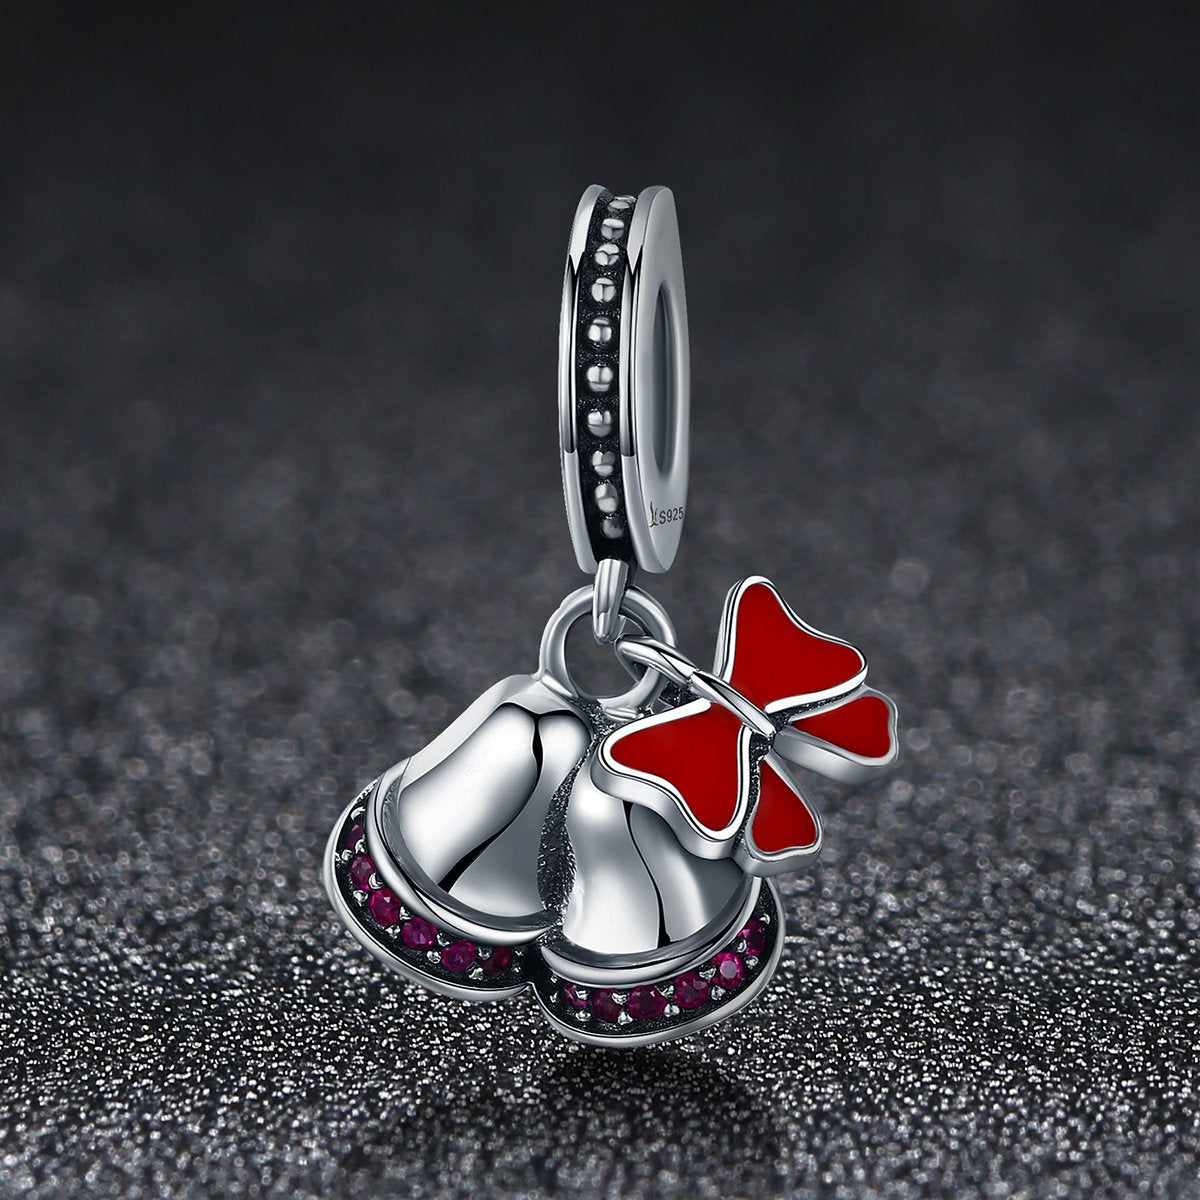 Sterling 925 silver charm the double bells bead pendant fits Pandora charm and European charm bracelet Xaxe.com